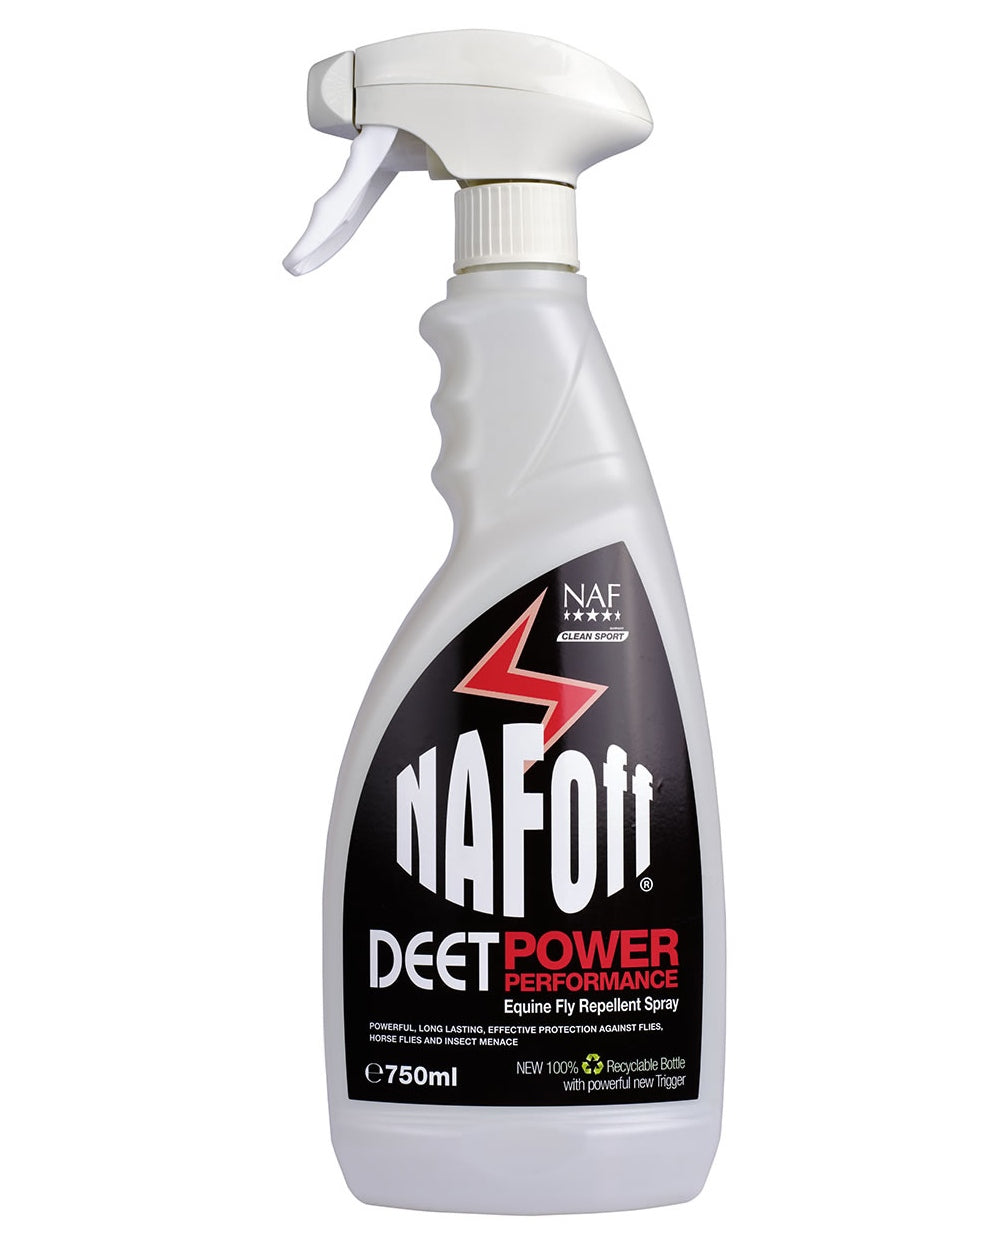 NAF Off Deet Power Performance 750ml on white background